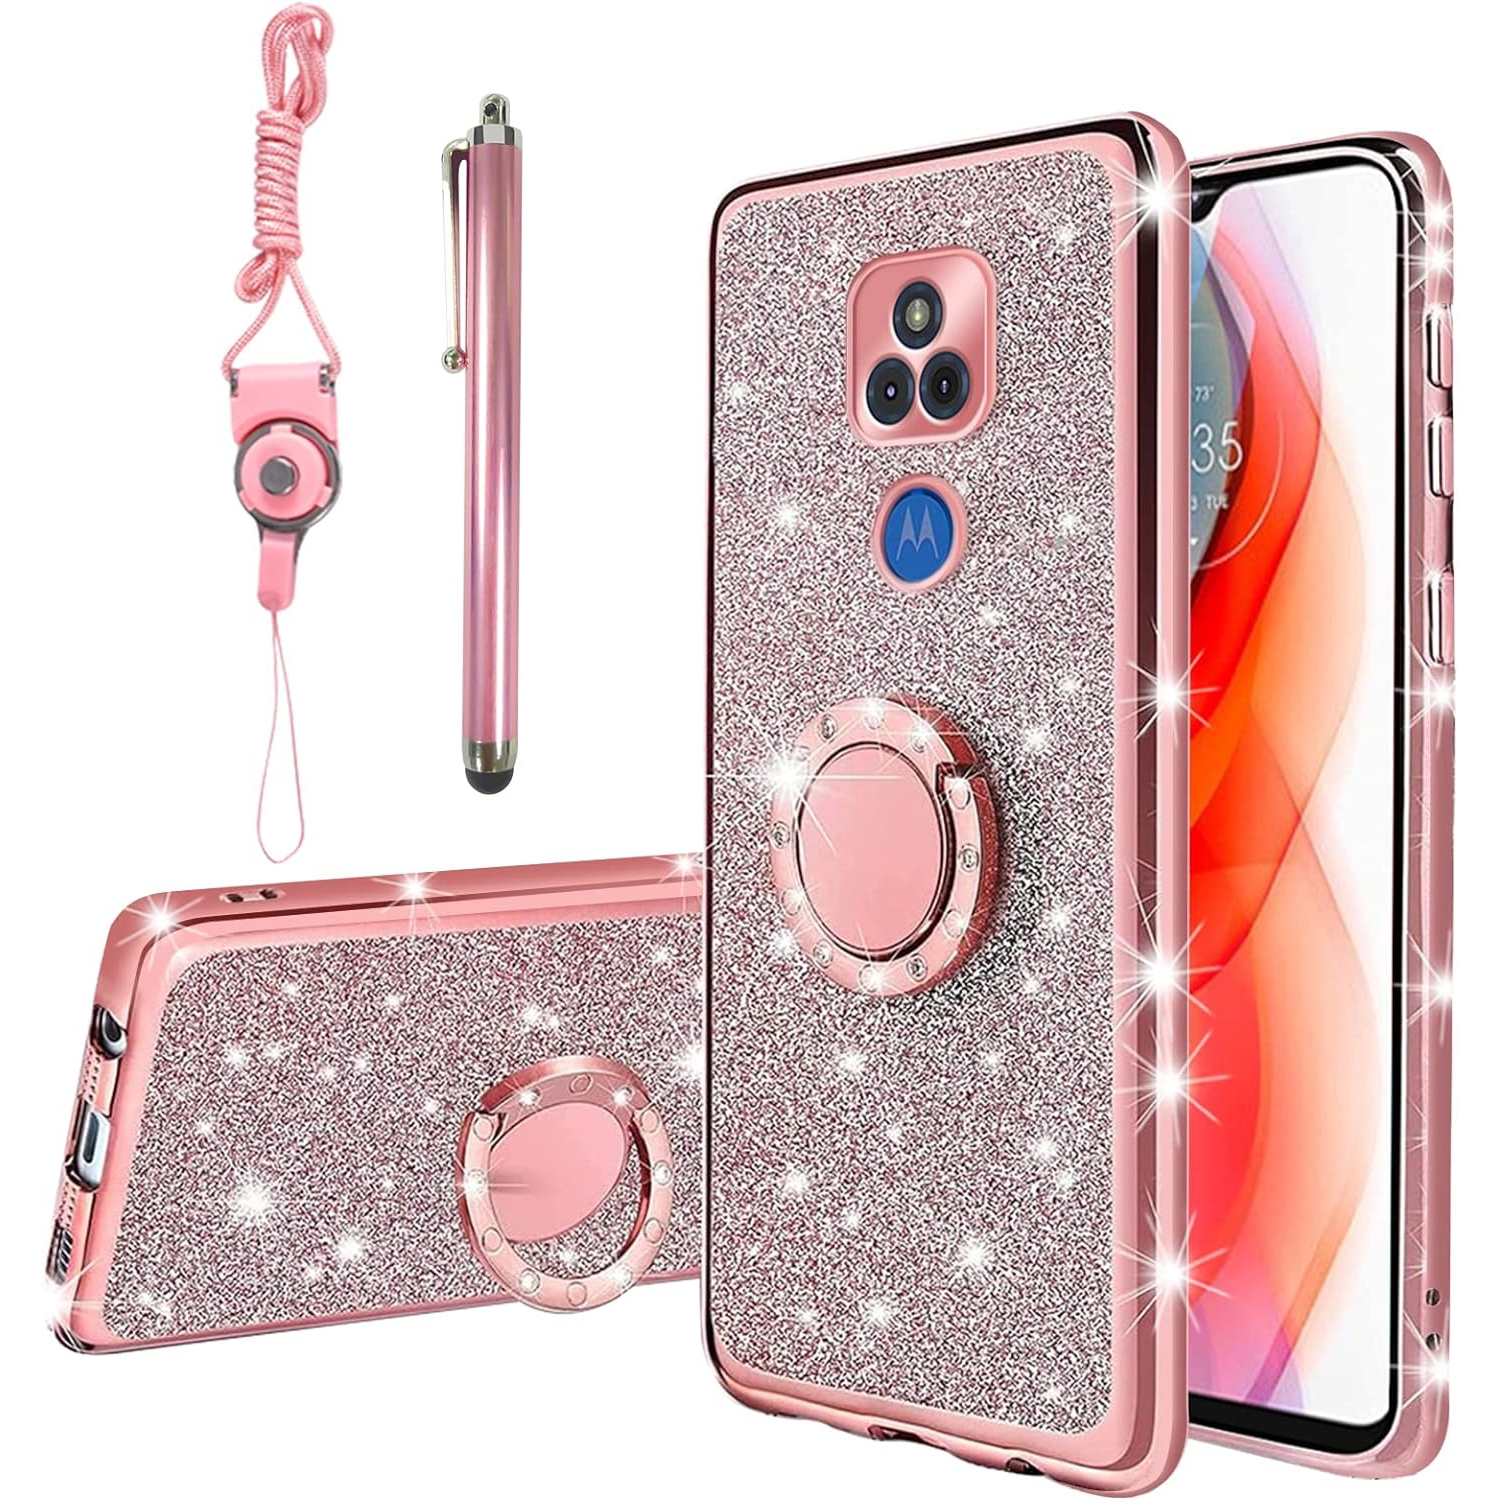 for Moto G Play 2021 Case for Women Glitter Crystal Soft Clear TPU Luxury Bling Cute Protective Cover